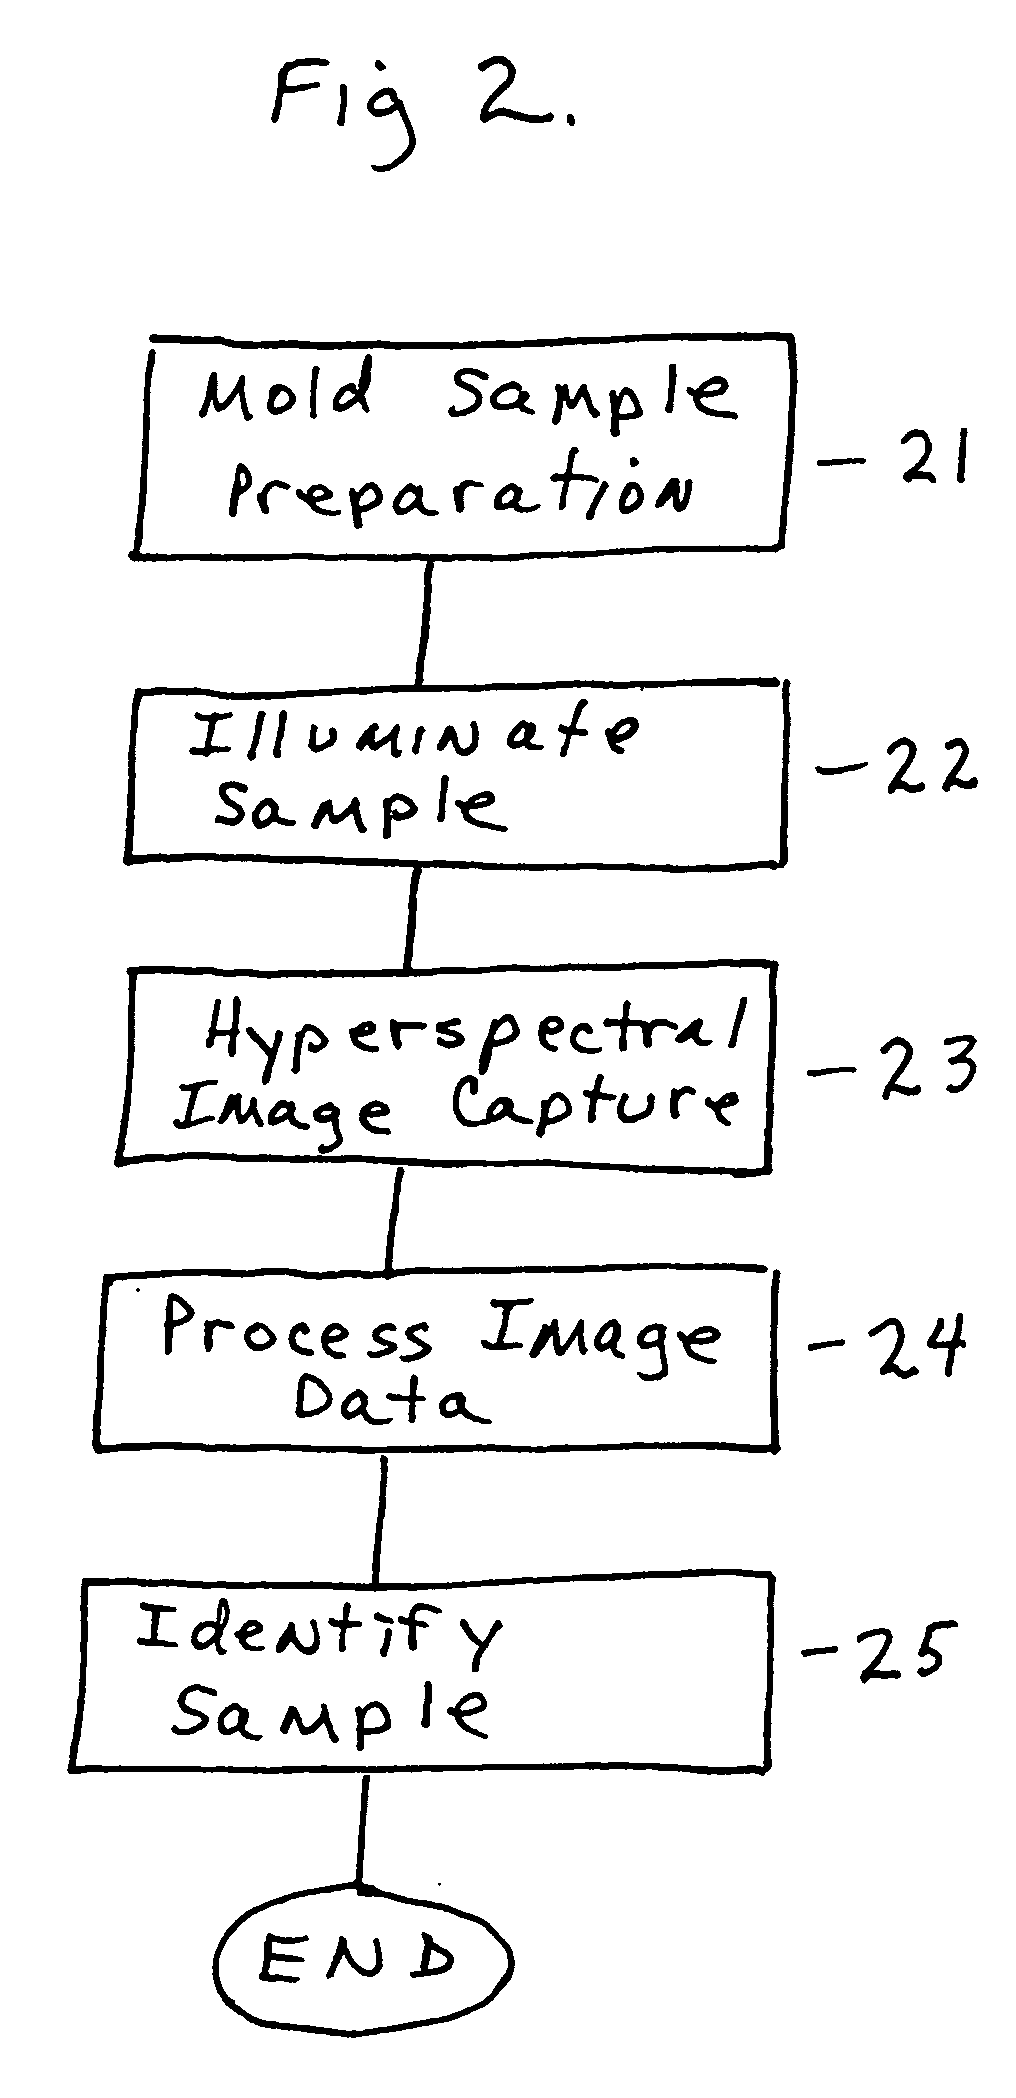 Method and apparatus for non-invasive rapid fungal specie (mold) identification having hyperspectral imagery